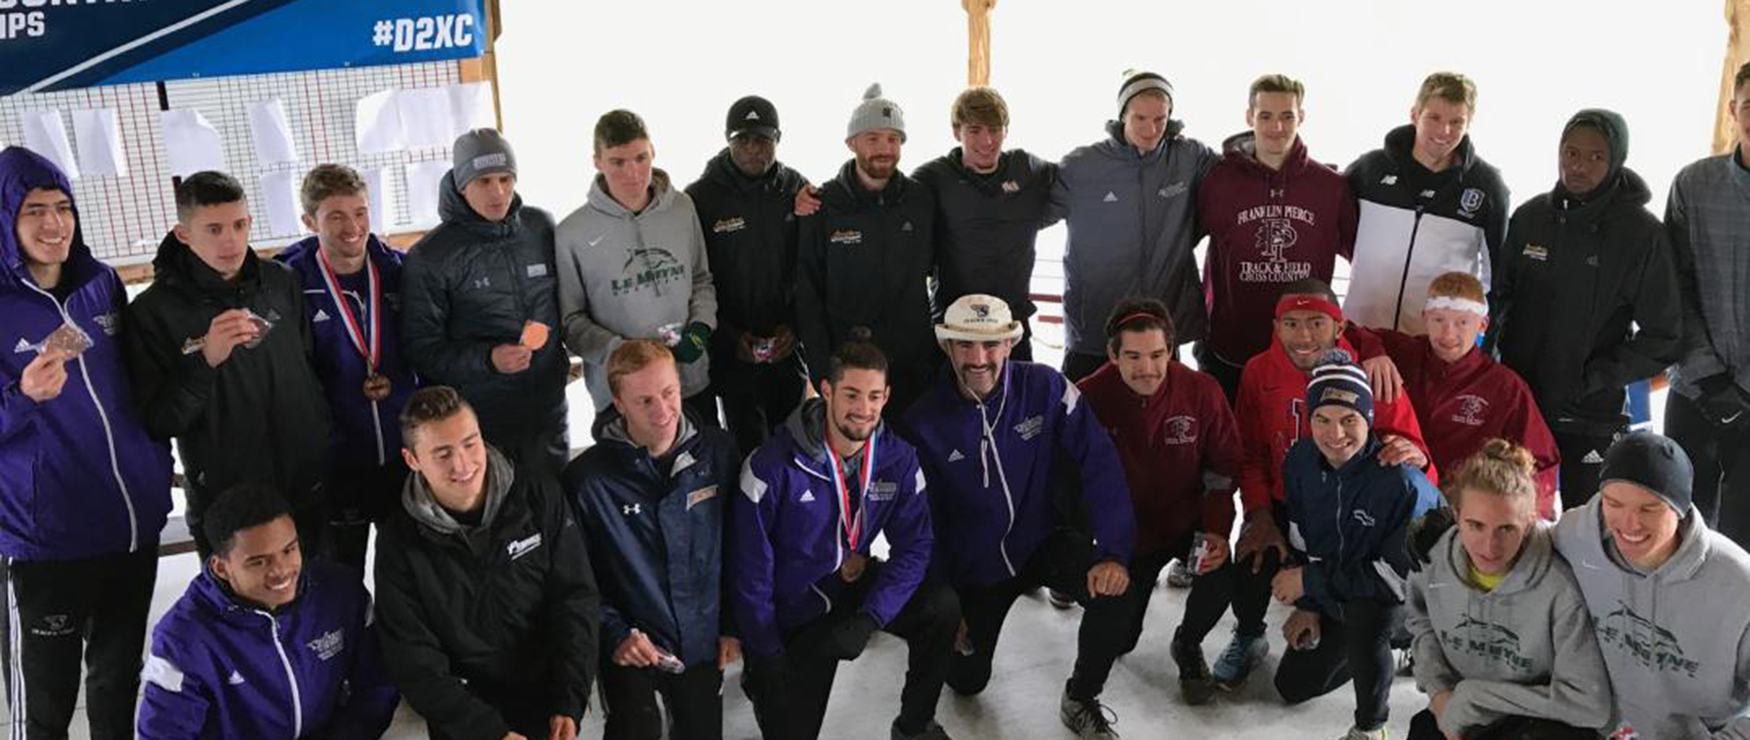 Men’s Cross Country Takes Fifth at NCAA Championship East Regional